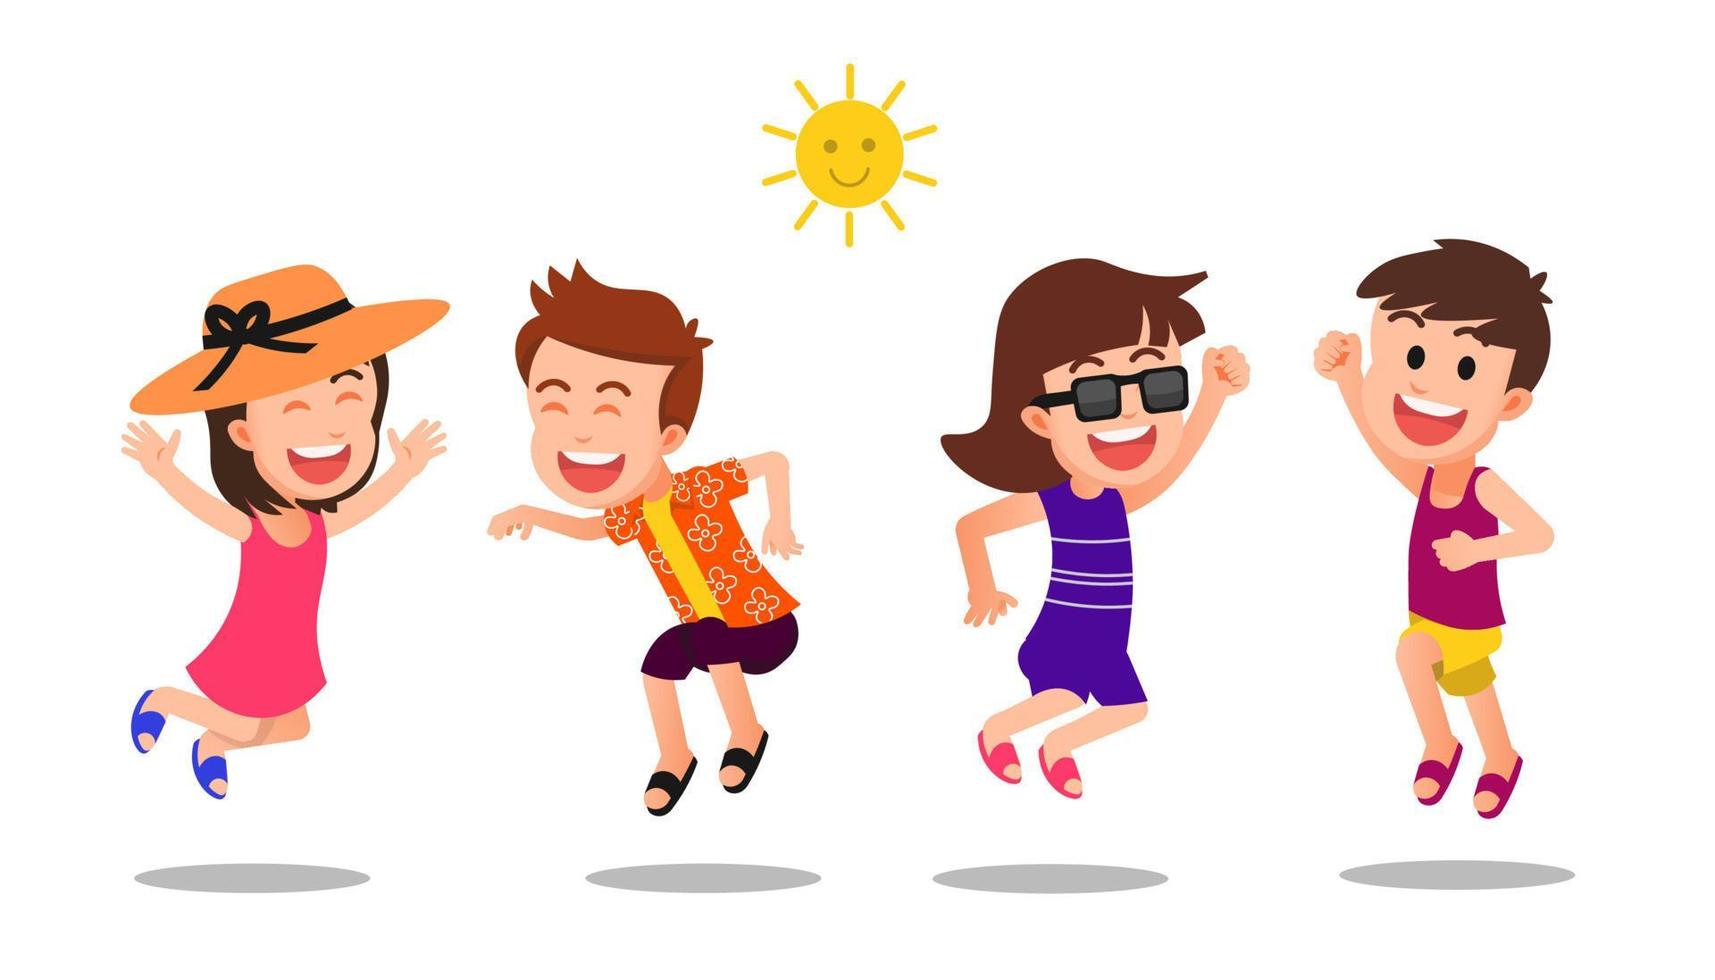 the children are jumping together and wearing summer clothes vector